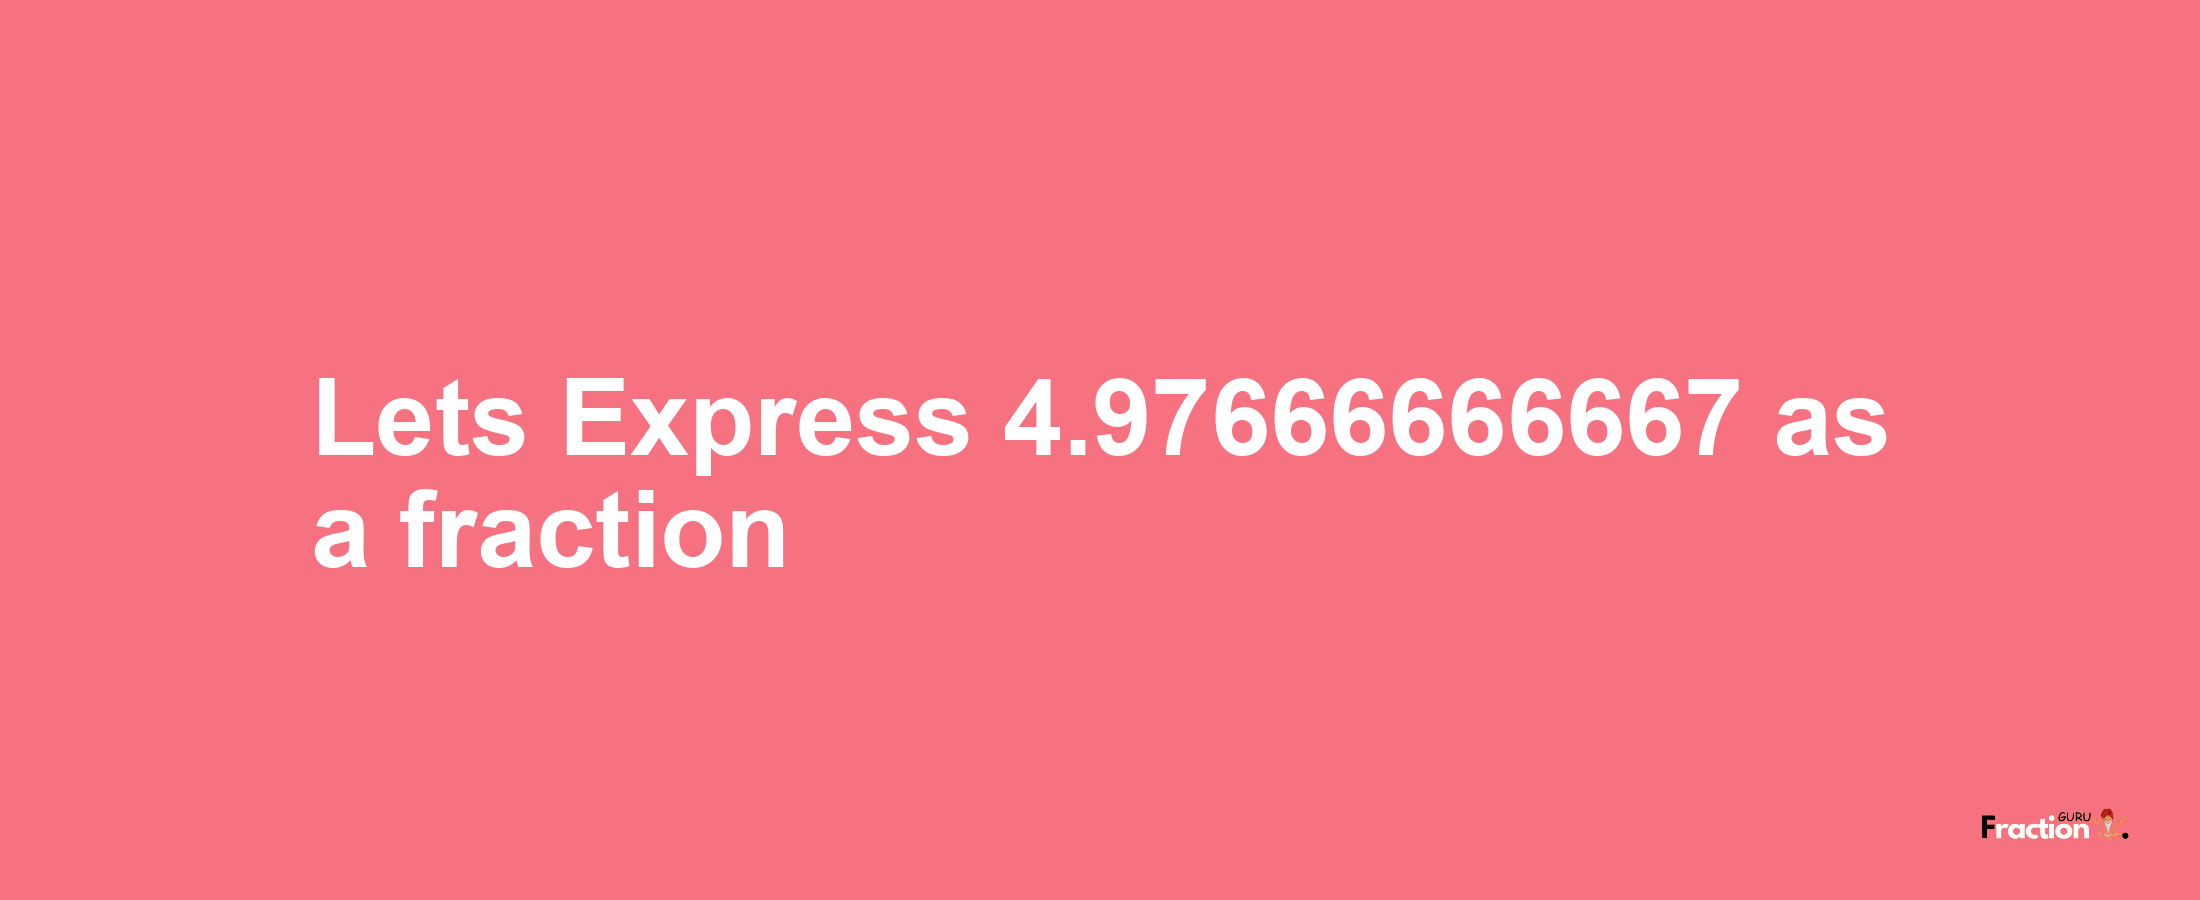 Lets Express 4.97666666667 as afraction